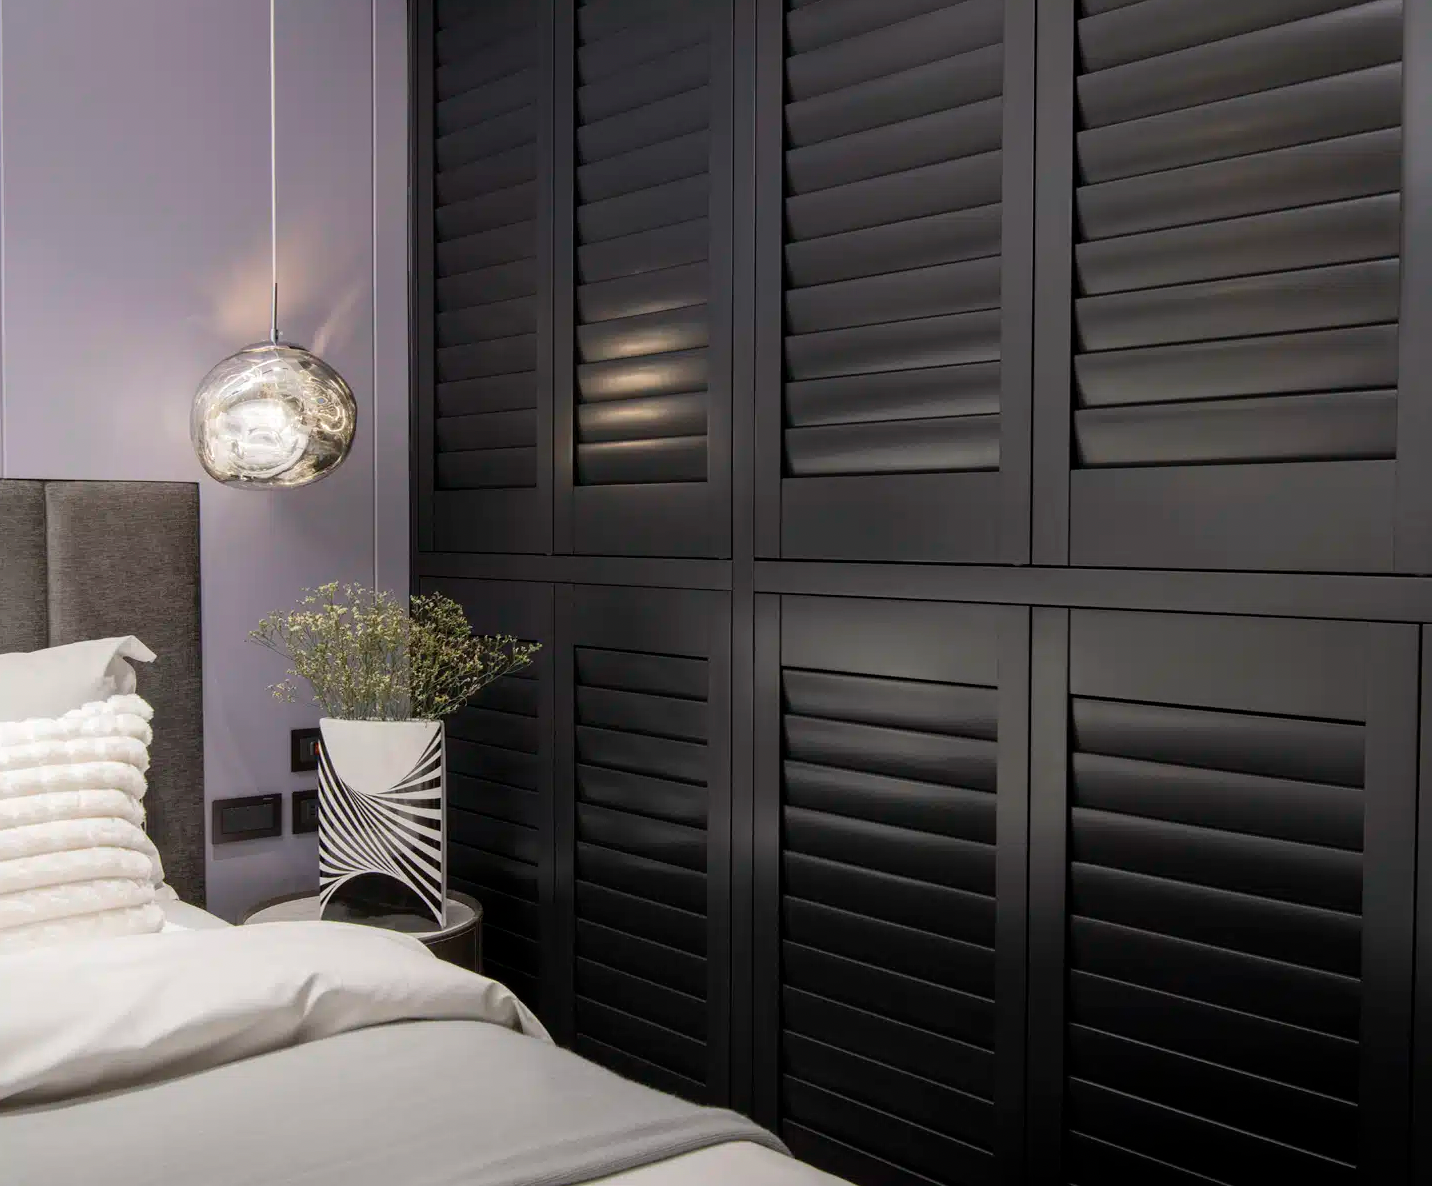 Brightwood™ Shutters